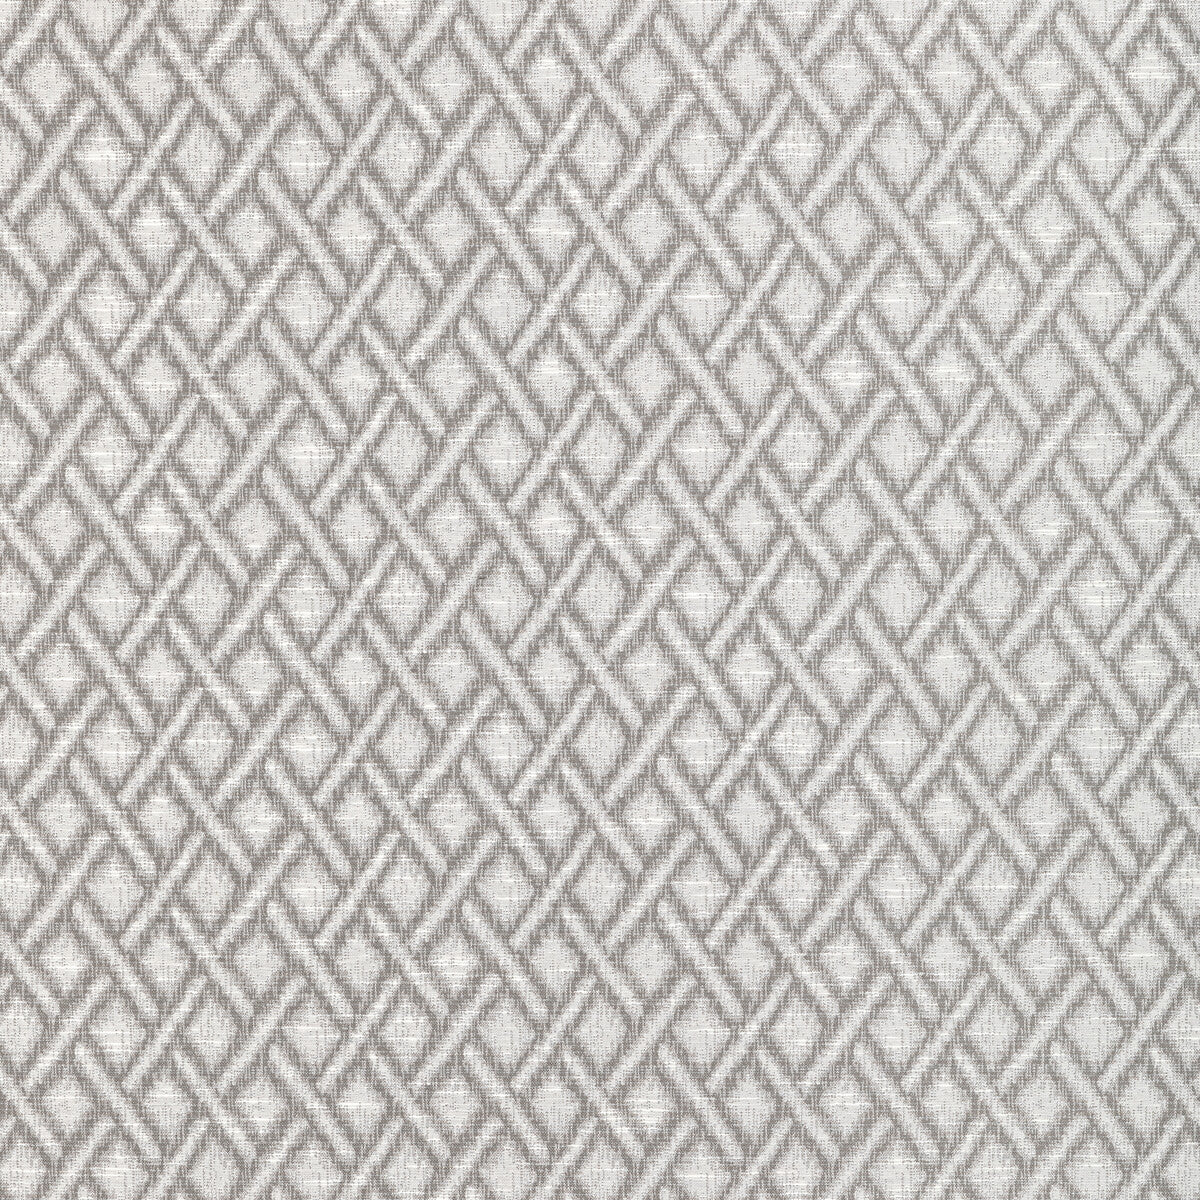 Cass fabric in grey color - pattern 36595.11.0 - by Kravet Basics